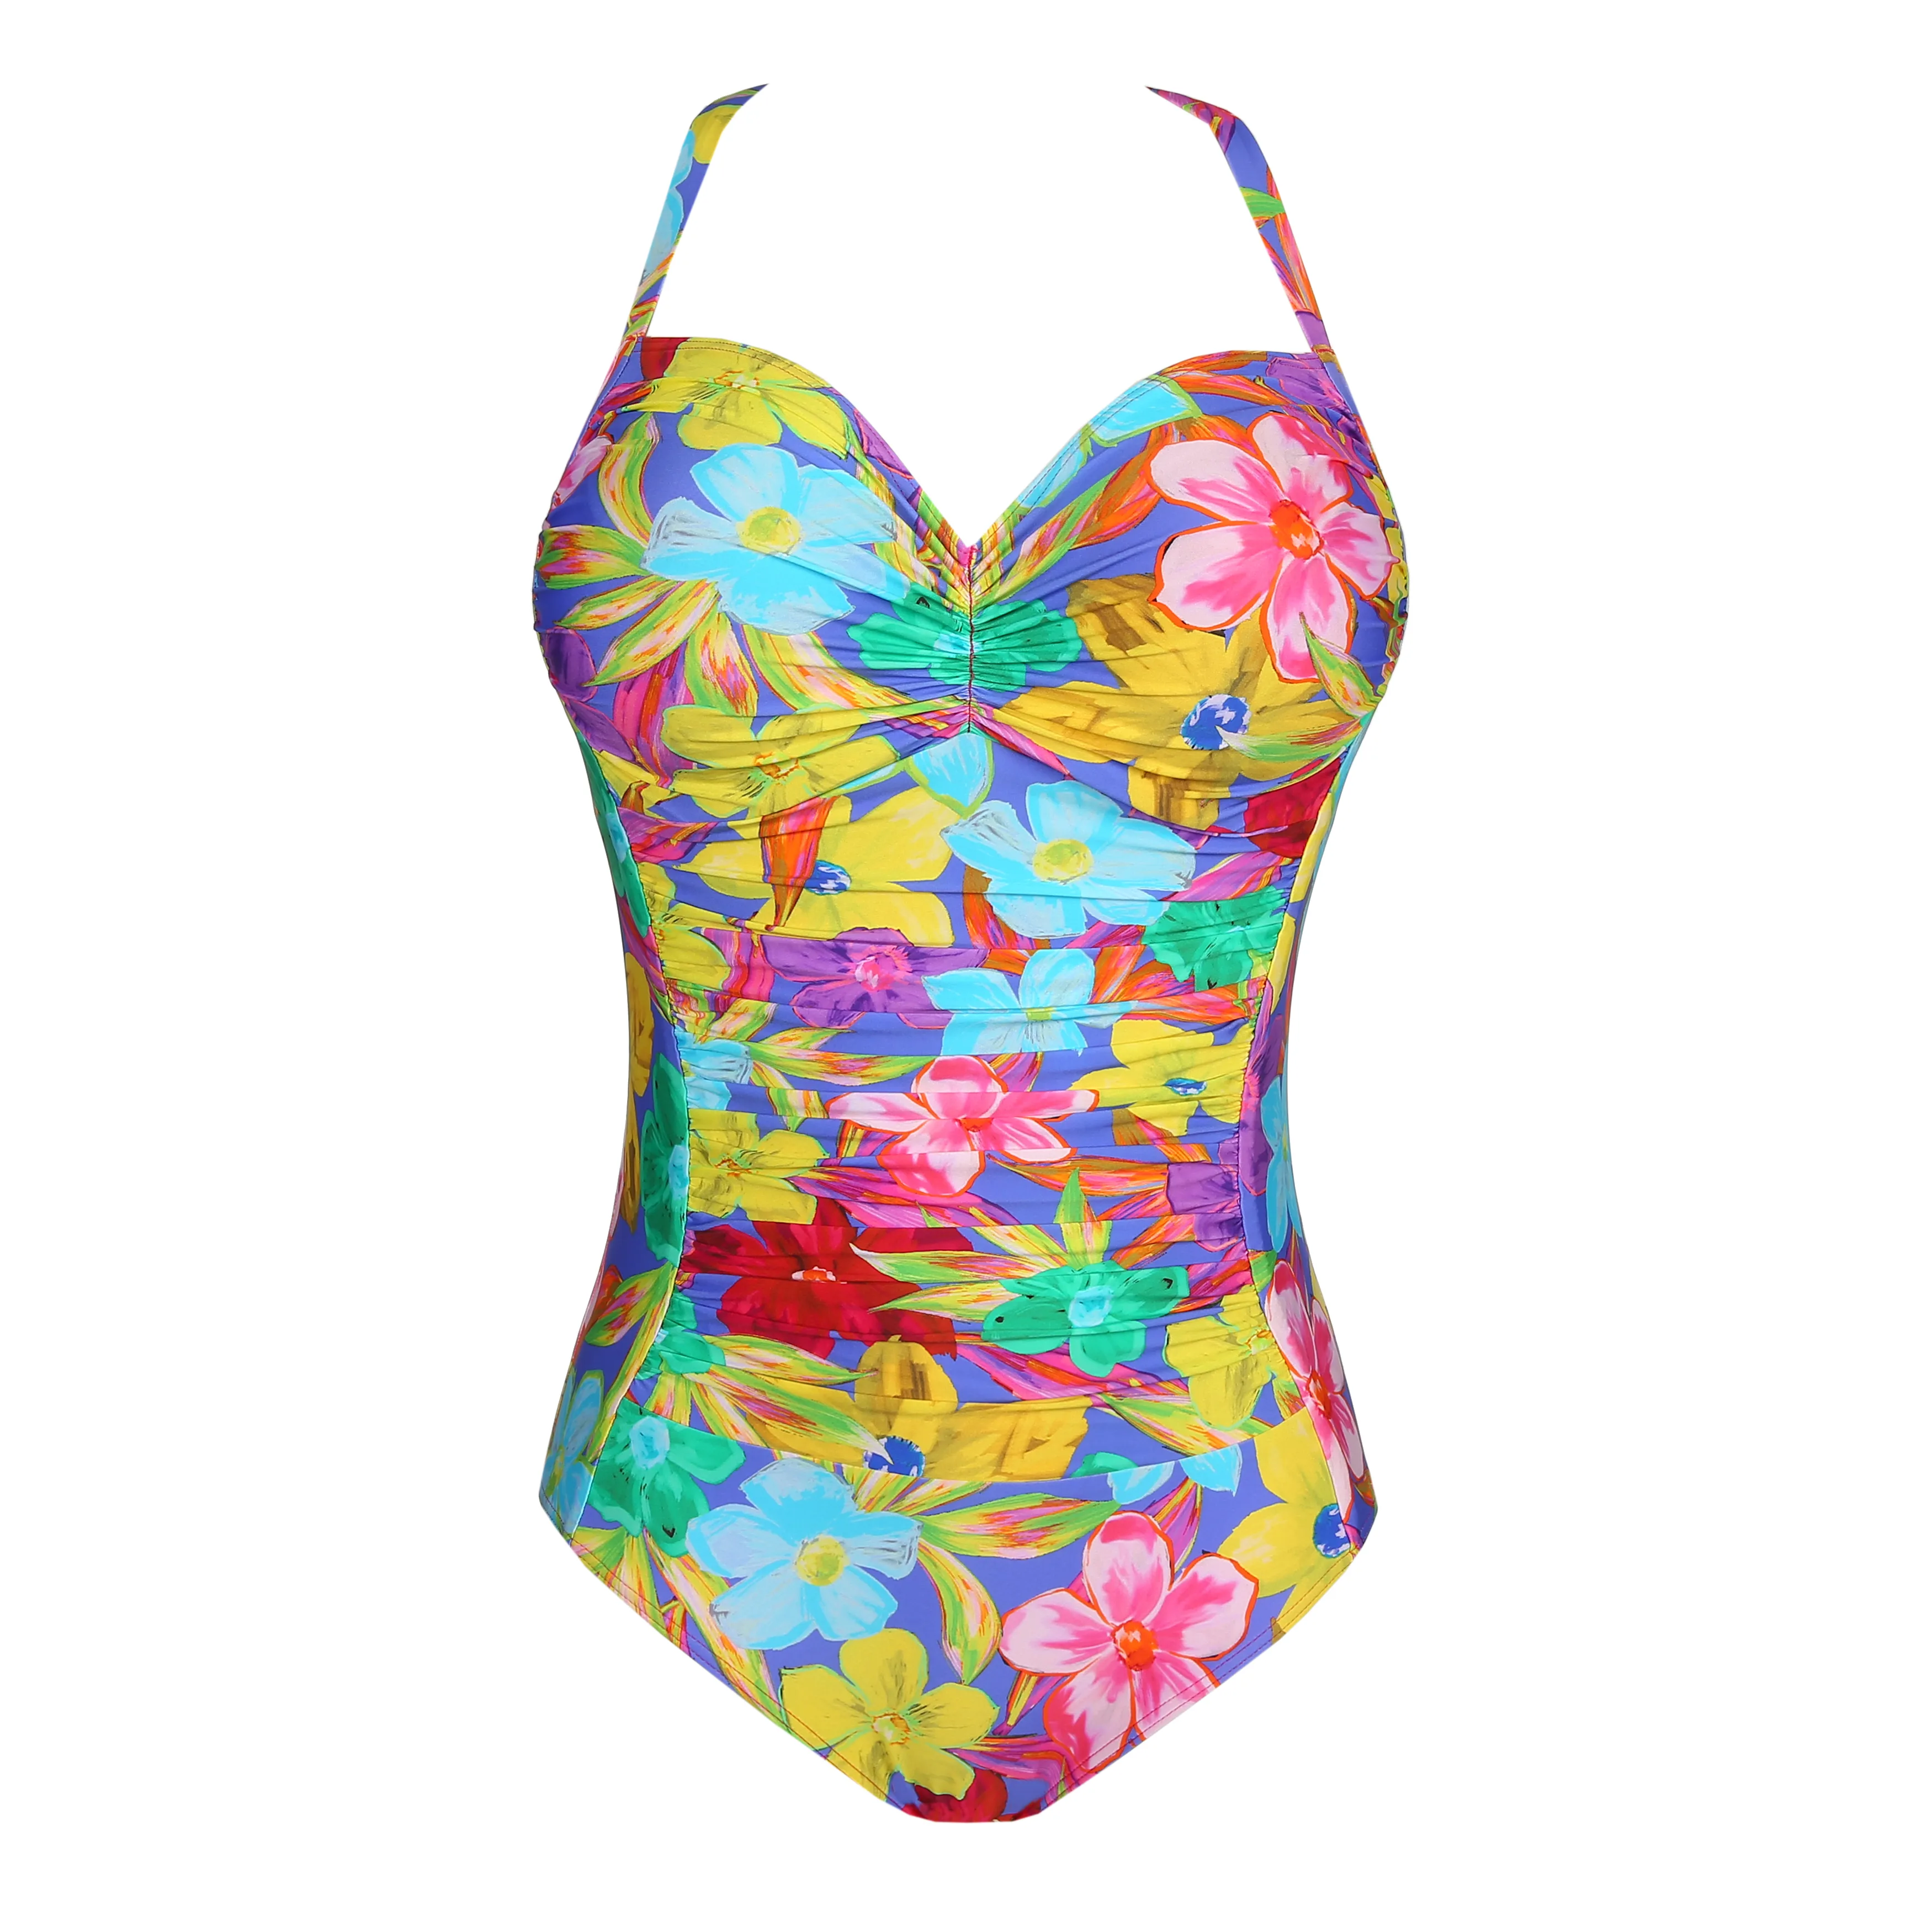 Full cup printed bikini- Come and Buy in Unas1, Discounts